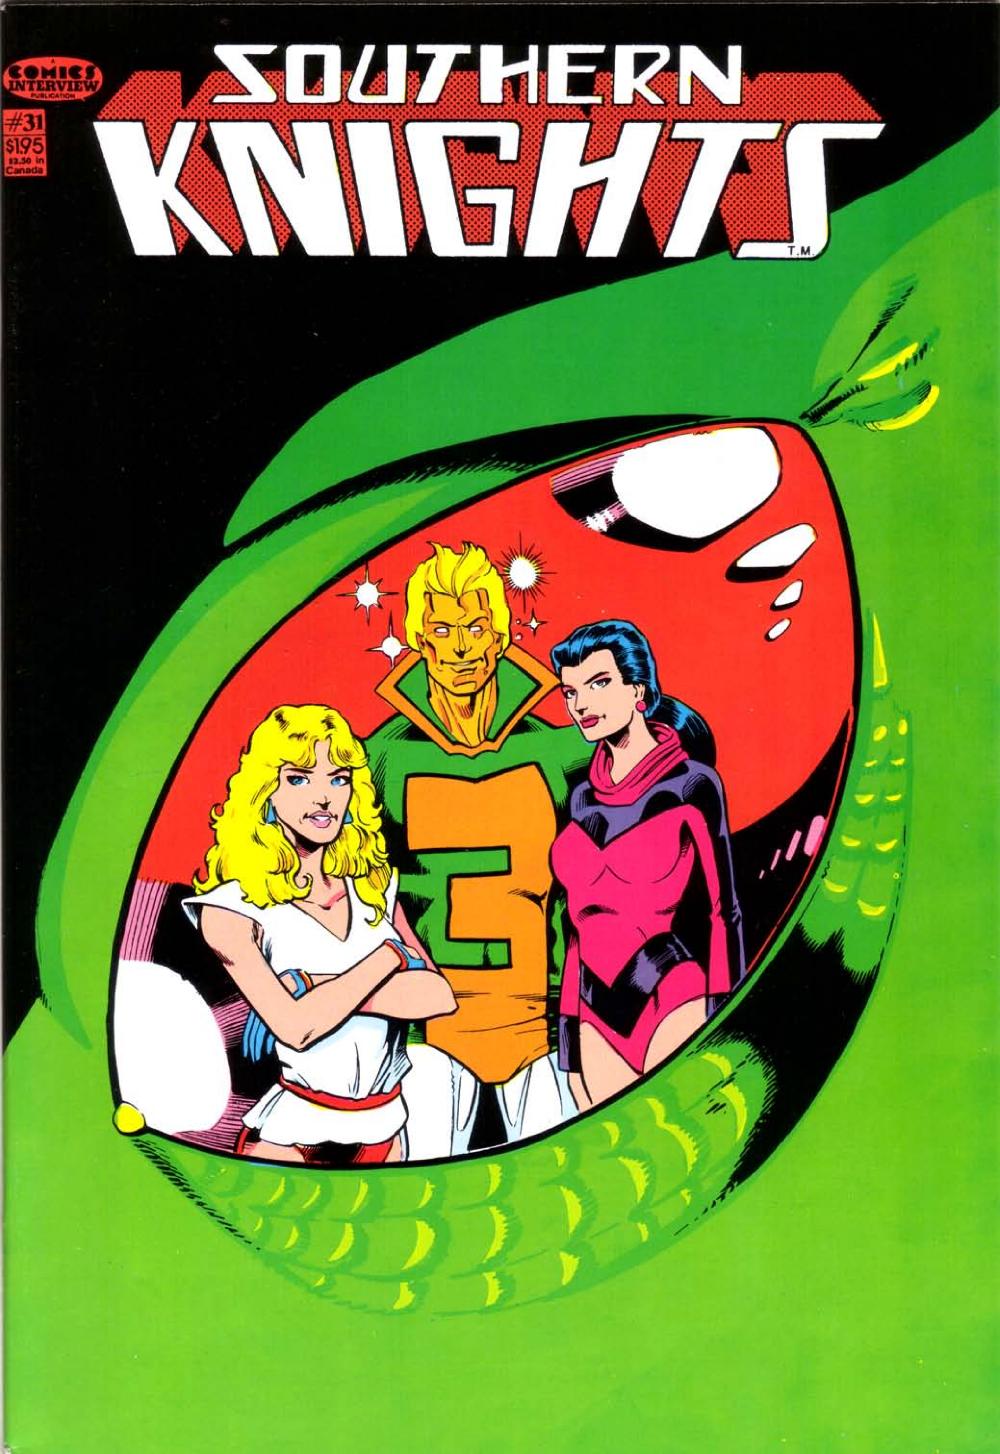 Read online Southern Knights comic -  Issue #31 - 1